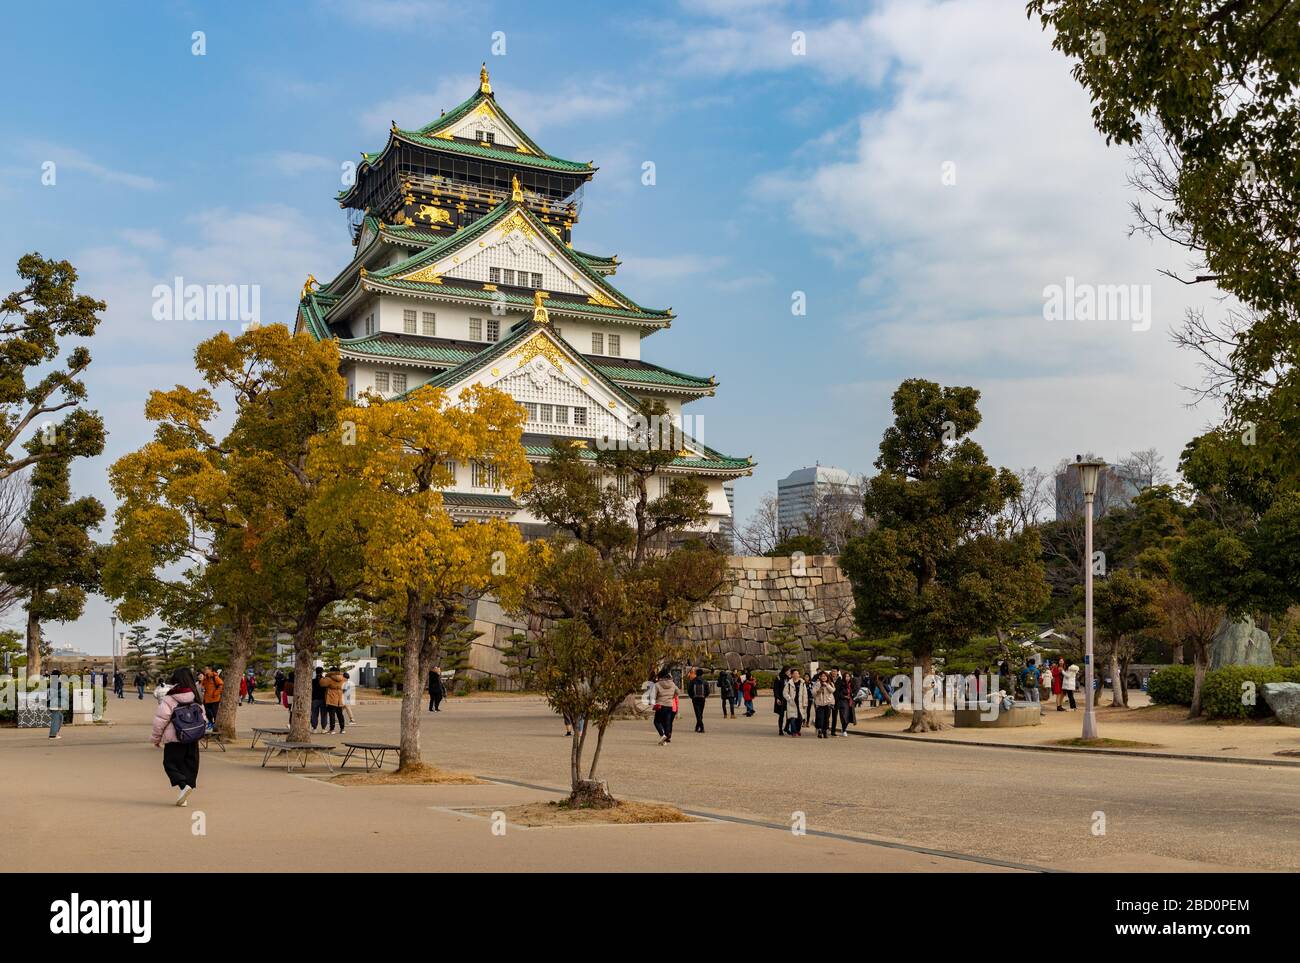 A picture of the Osaka Castle as seem from the square below. Stock Photo